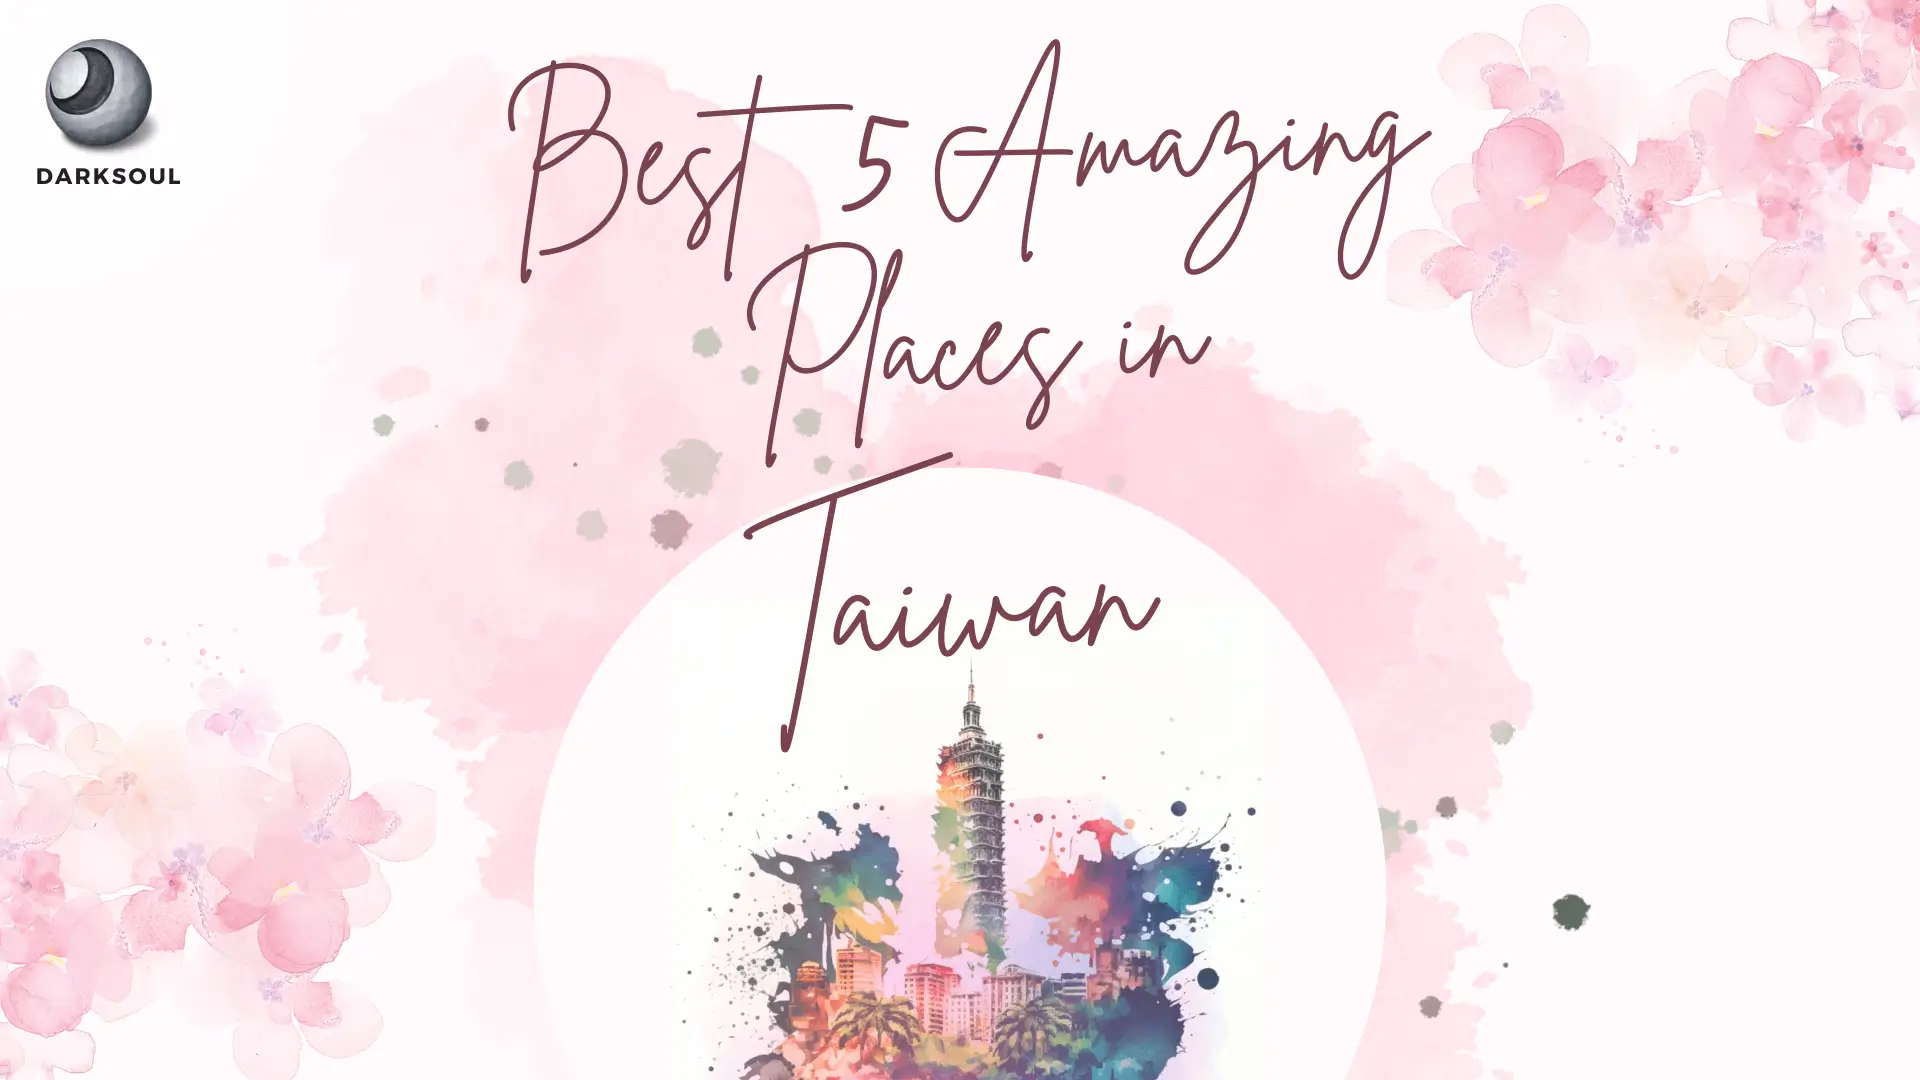 Best 5 amazing places to visit in Taiwan - cover image